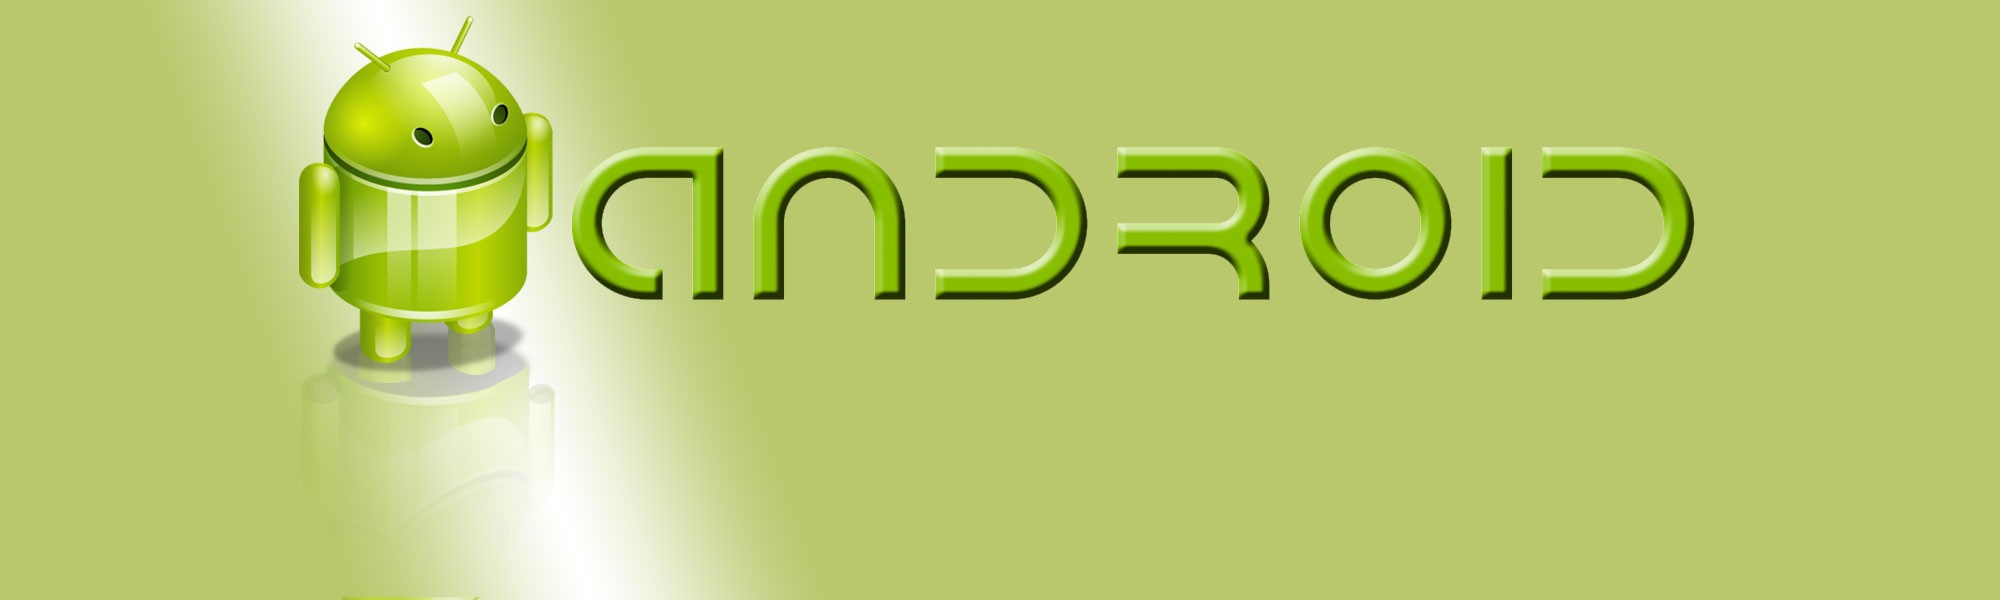 Android-Entwickler